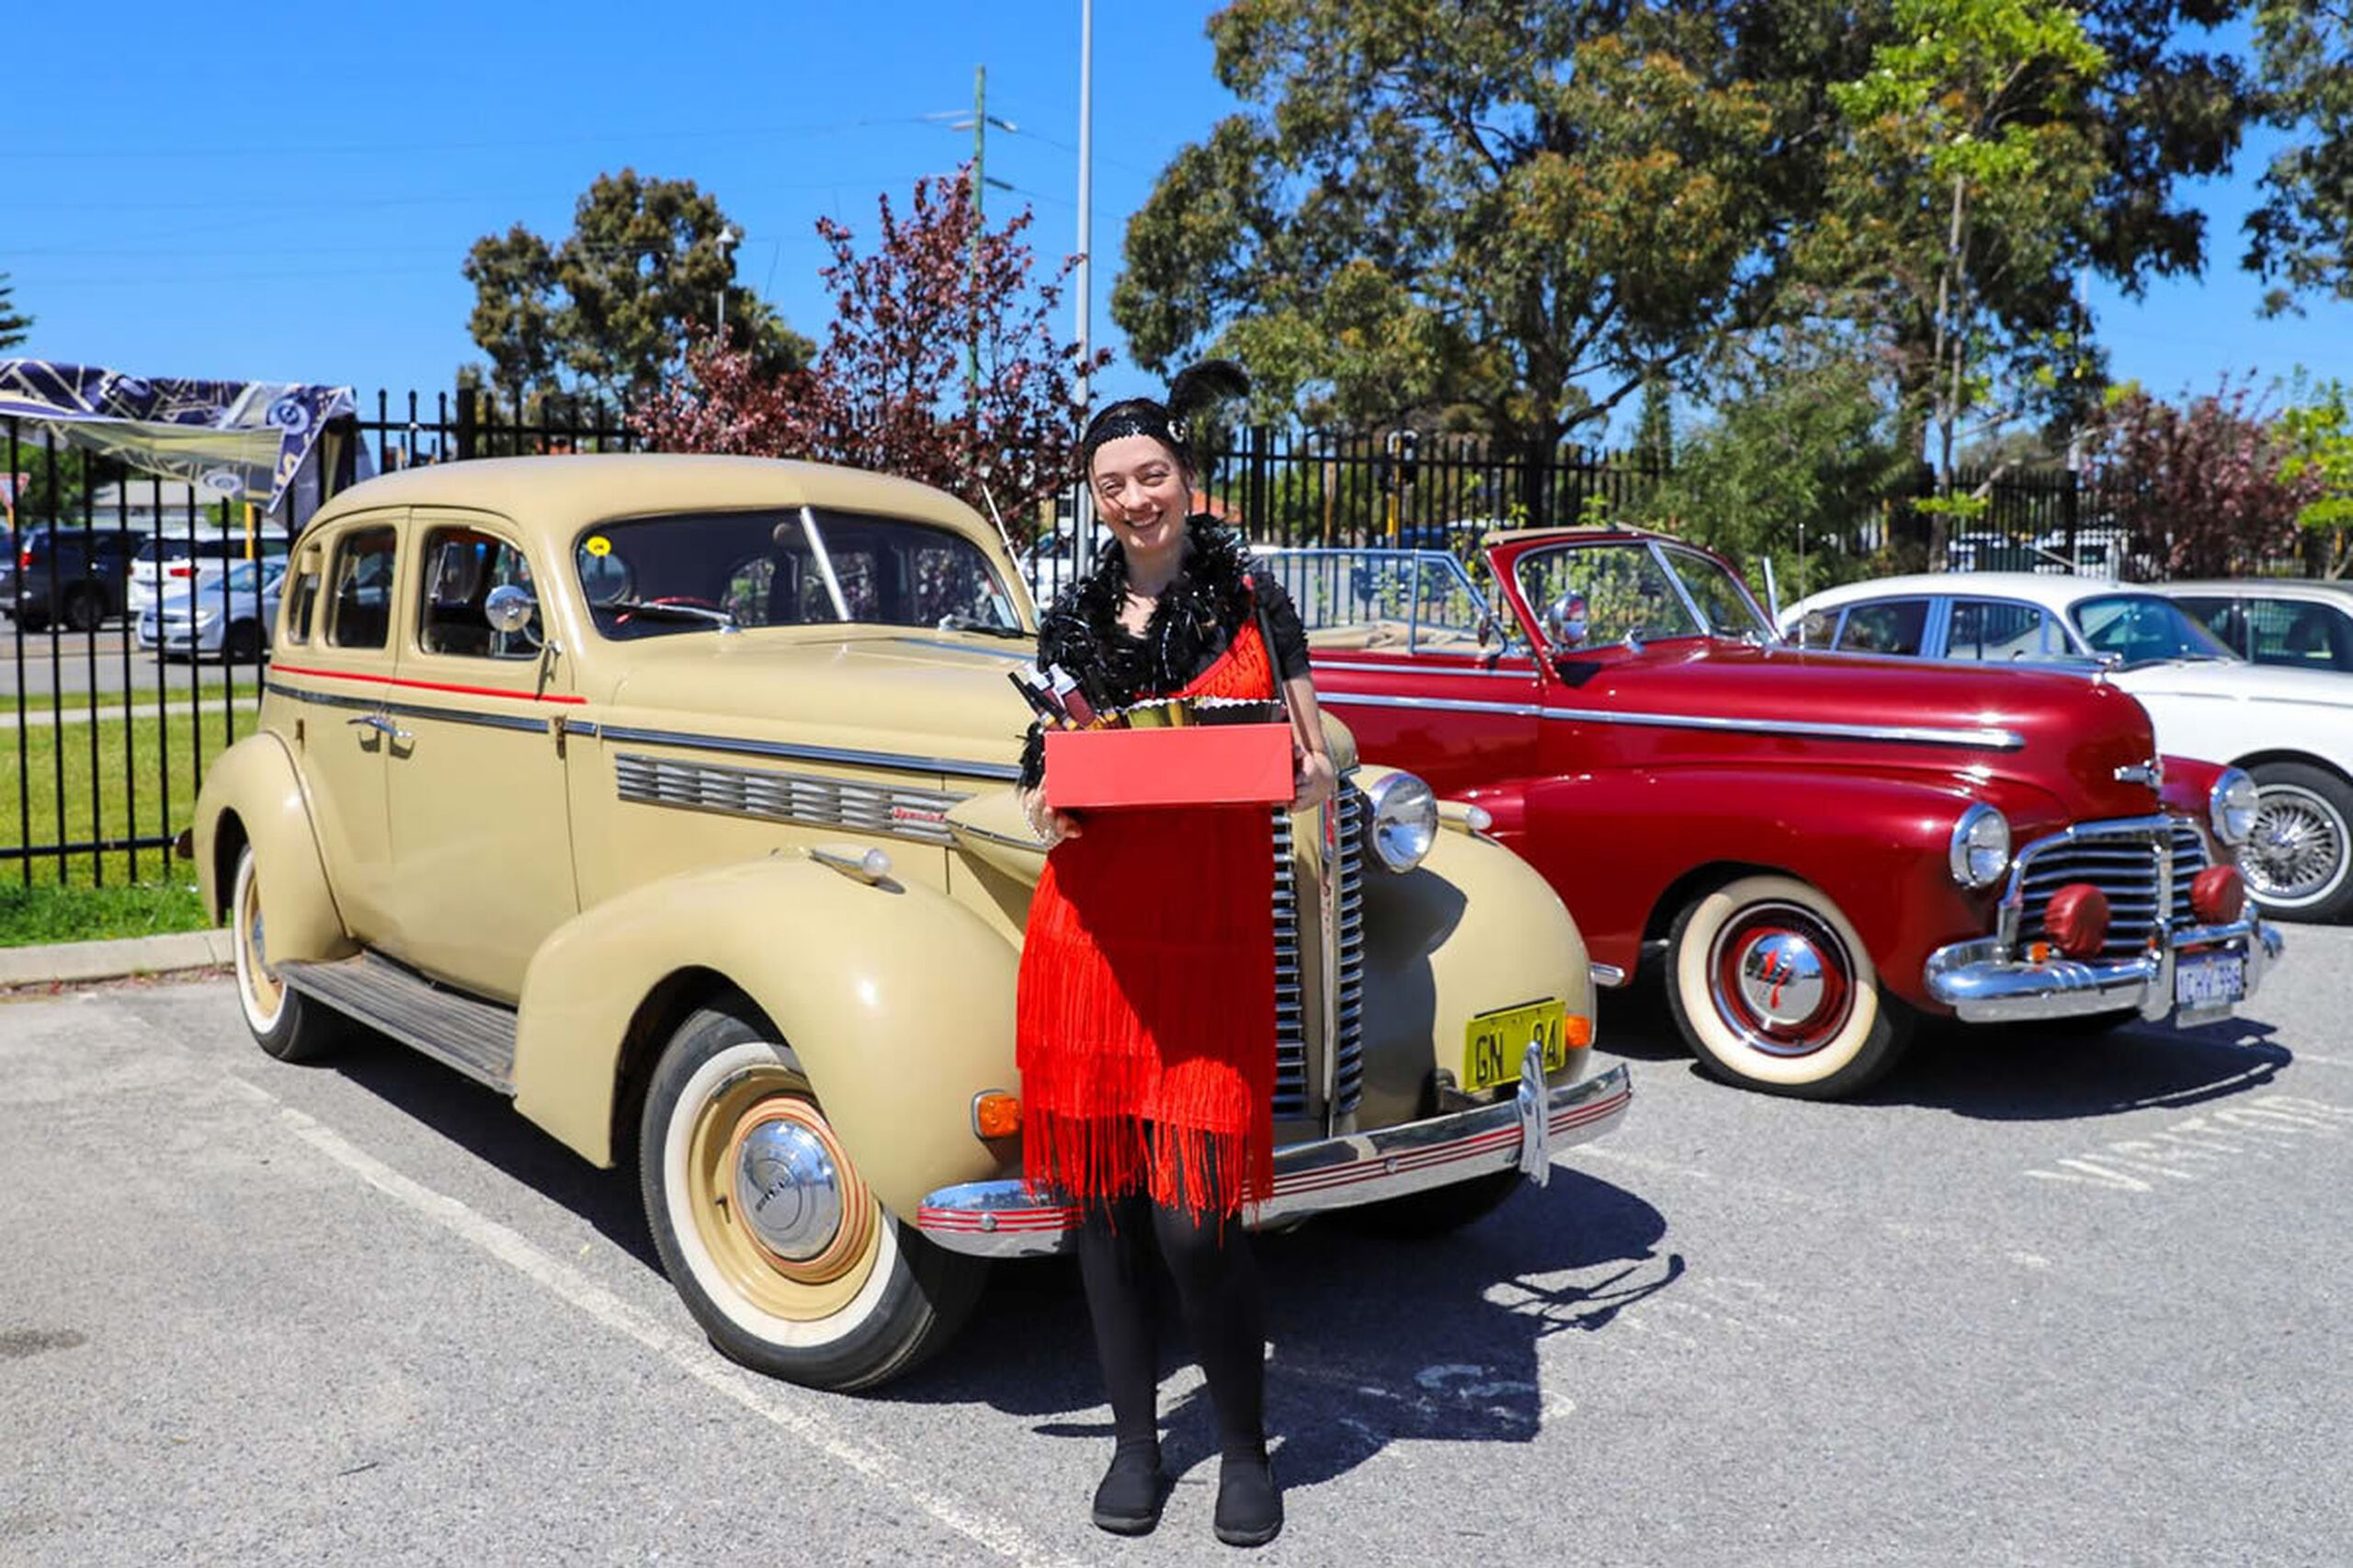 Vintage cars and picturesque weather at Baptistcare Morrison Gardens